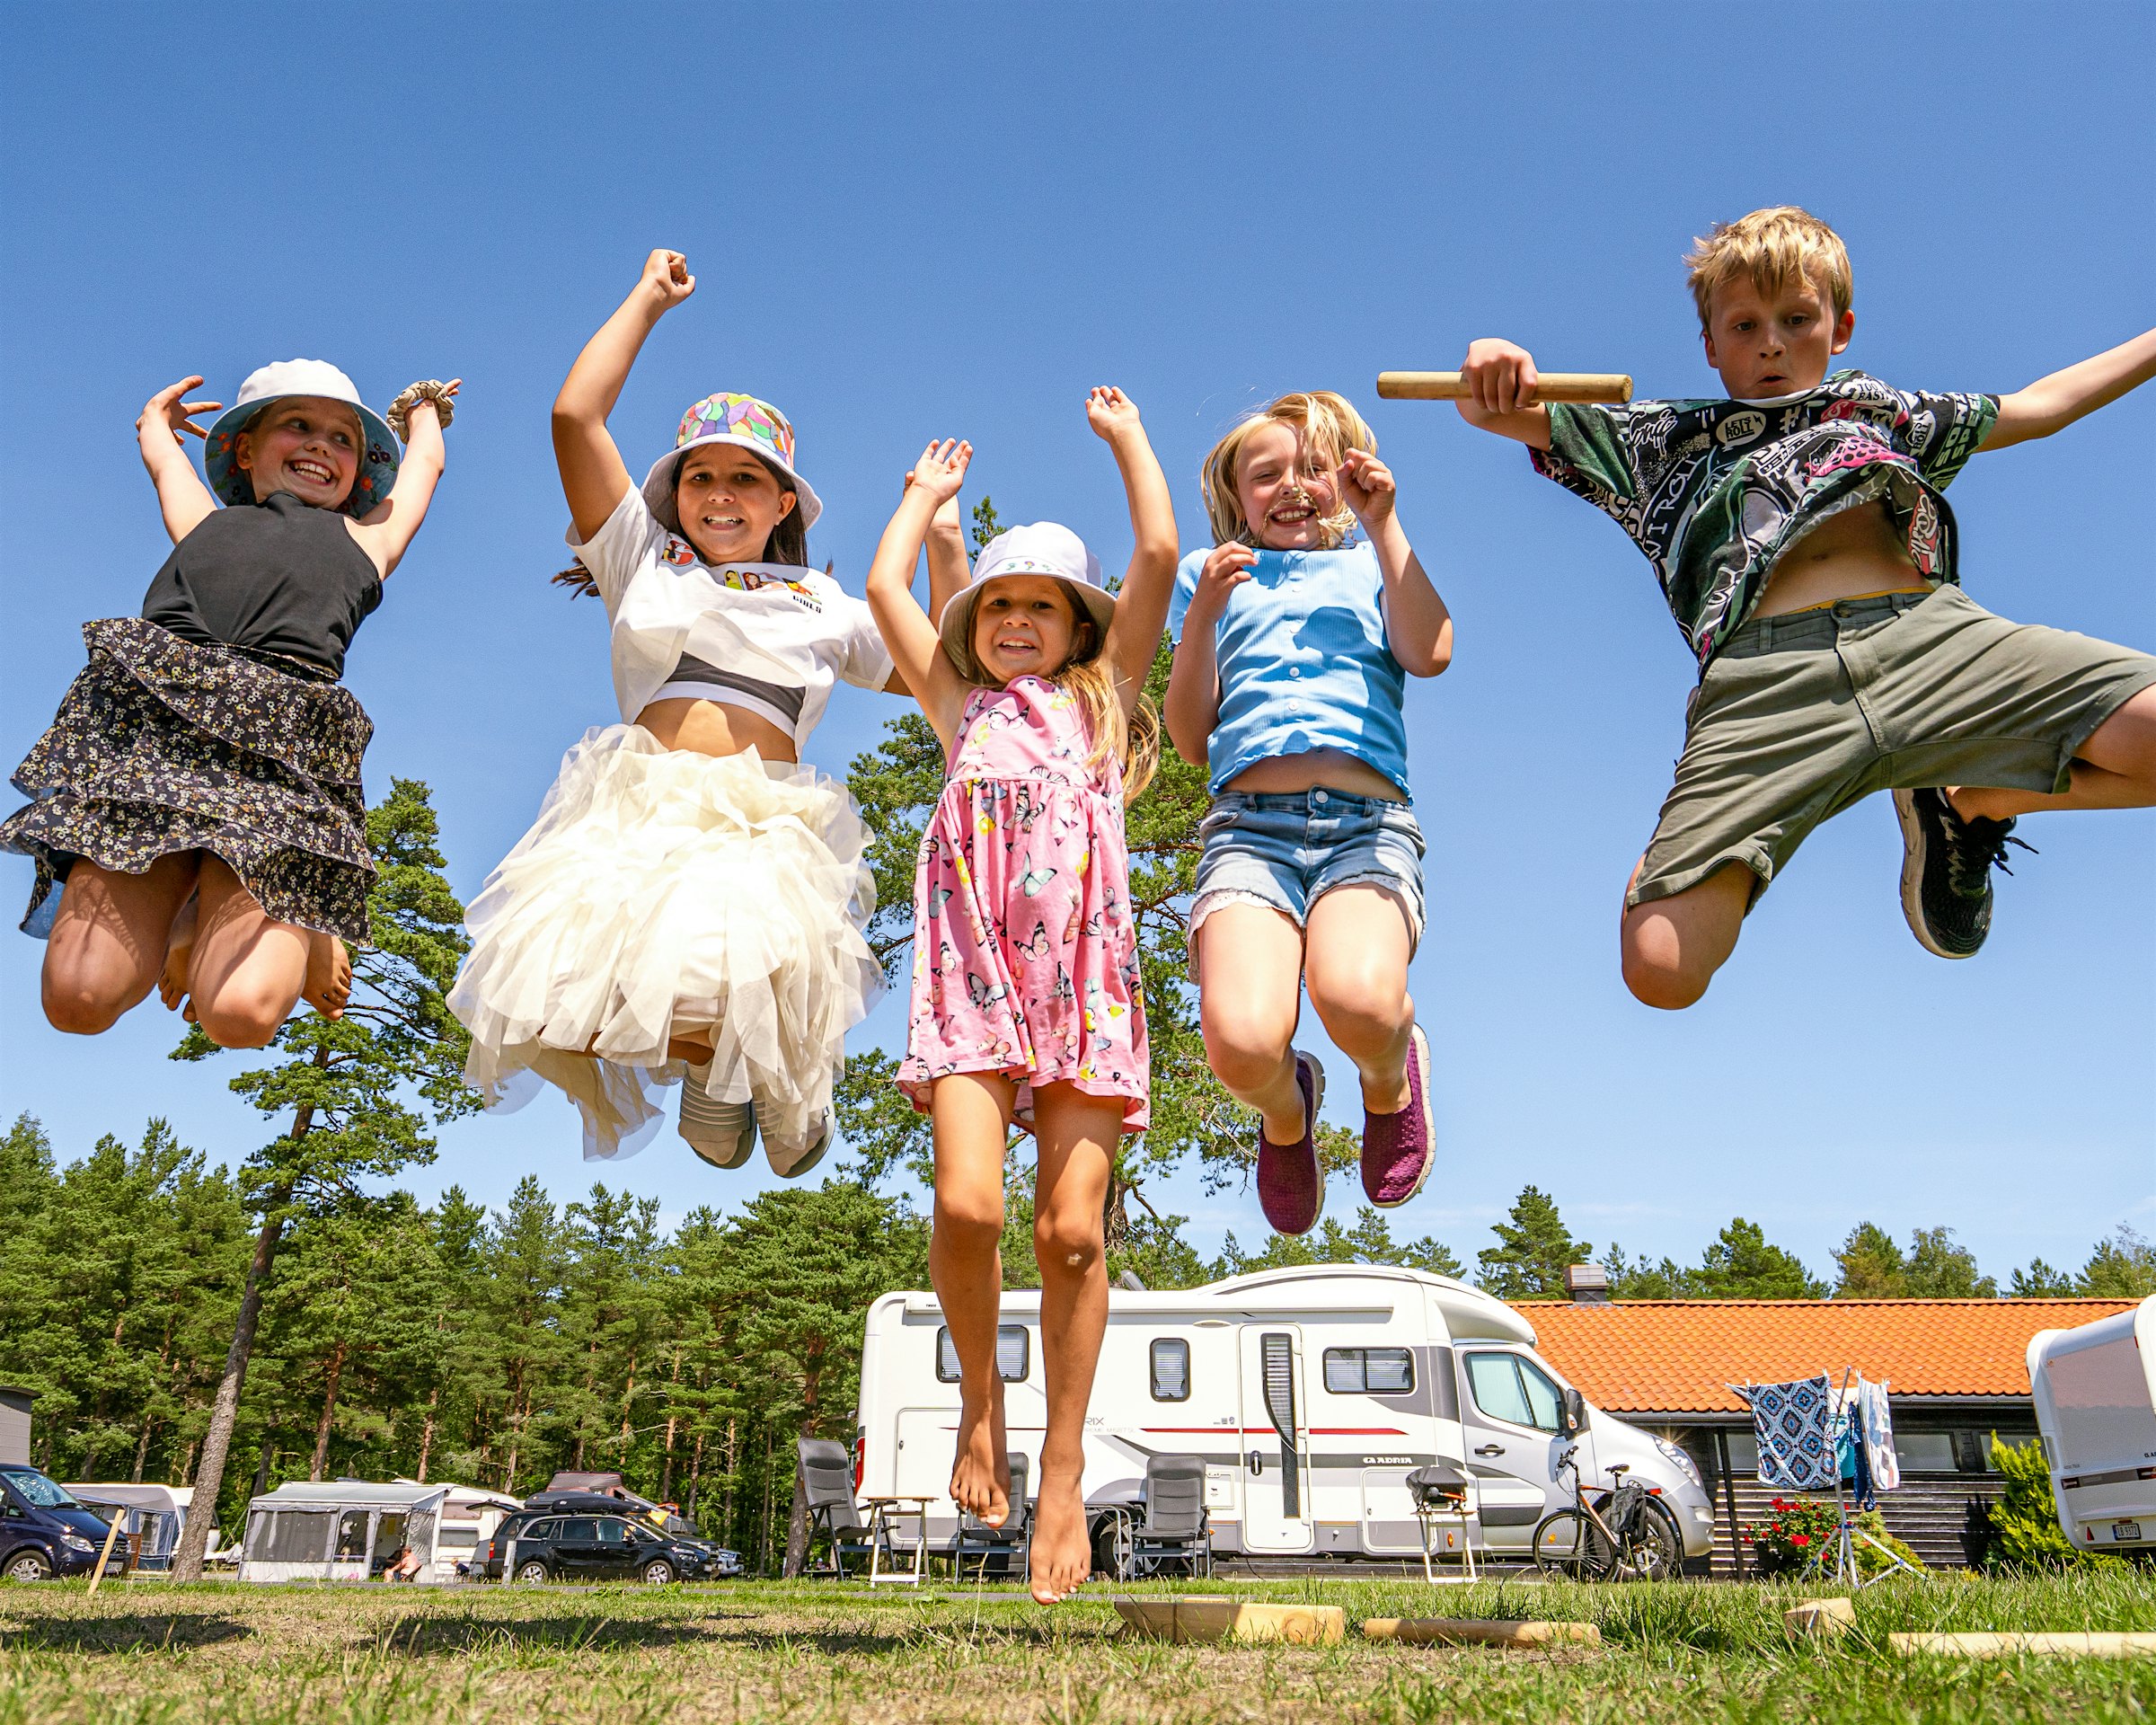 A group of children jump in the air with their hands above their heads at a campsite. Everyone smiles big. Photo